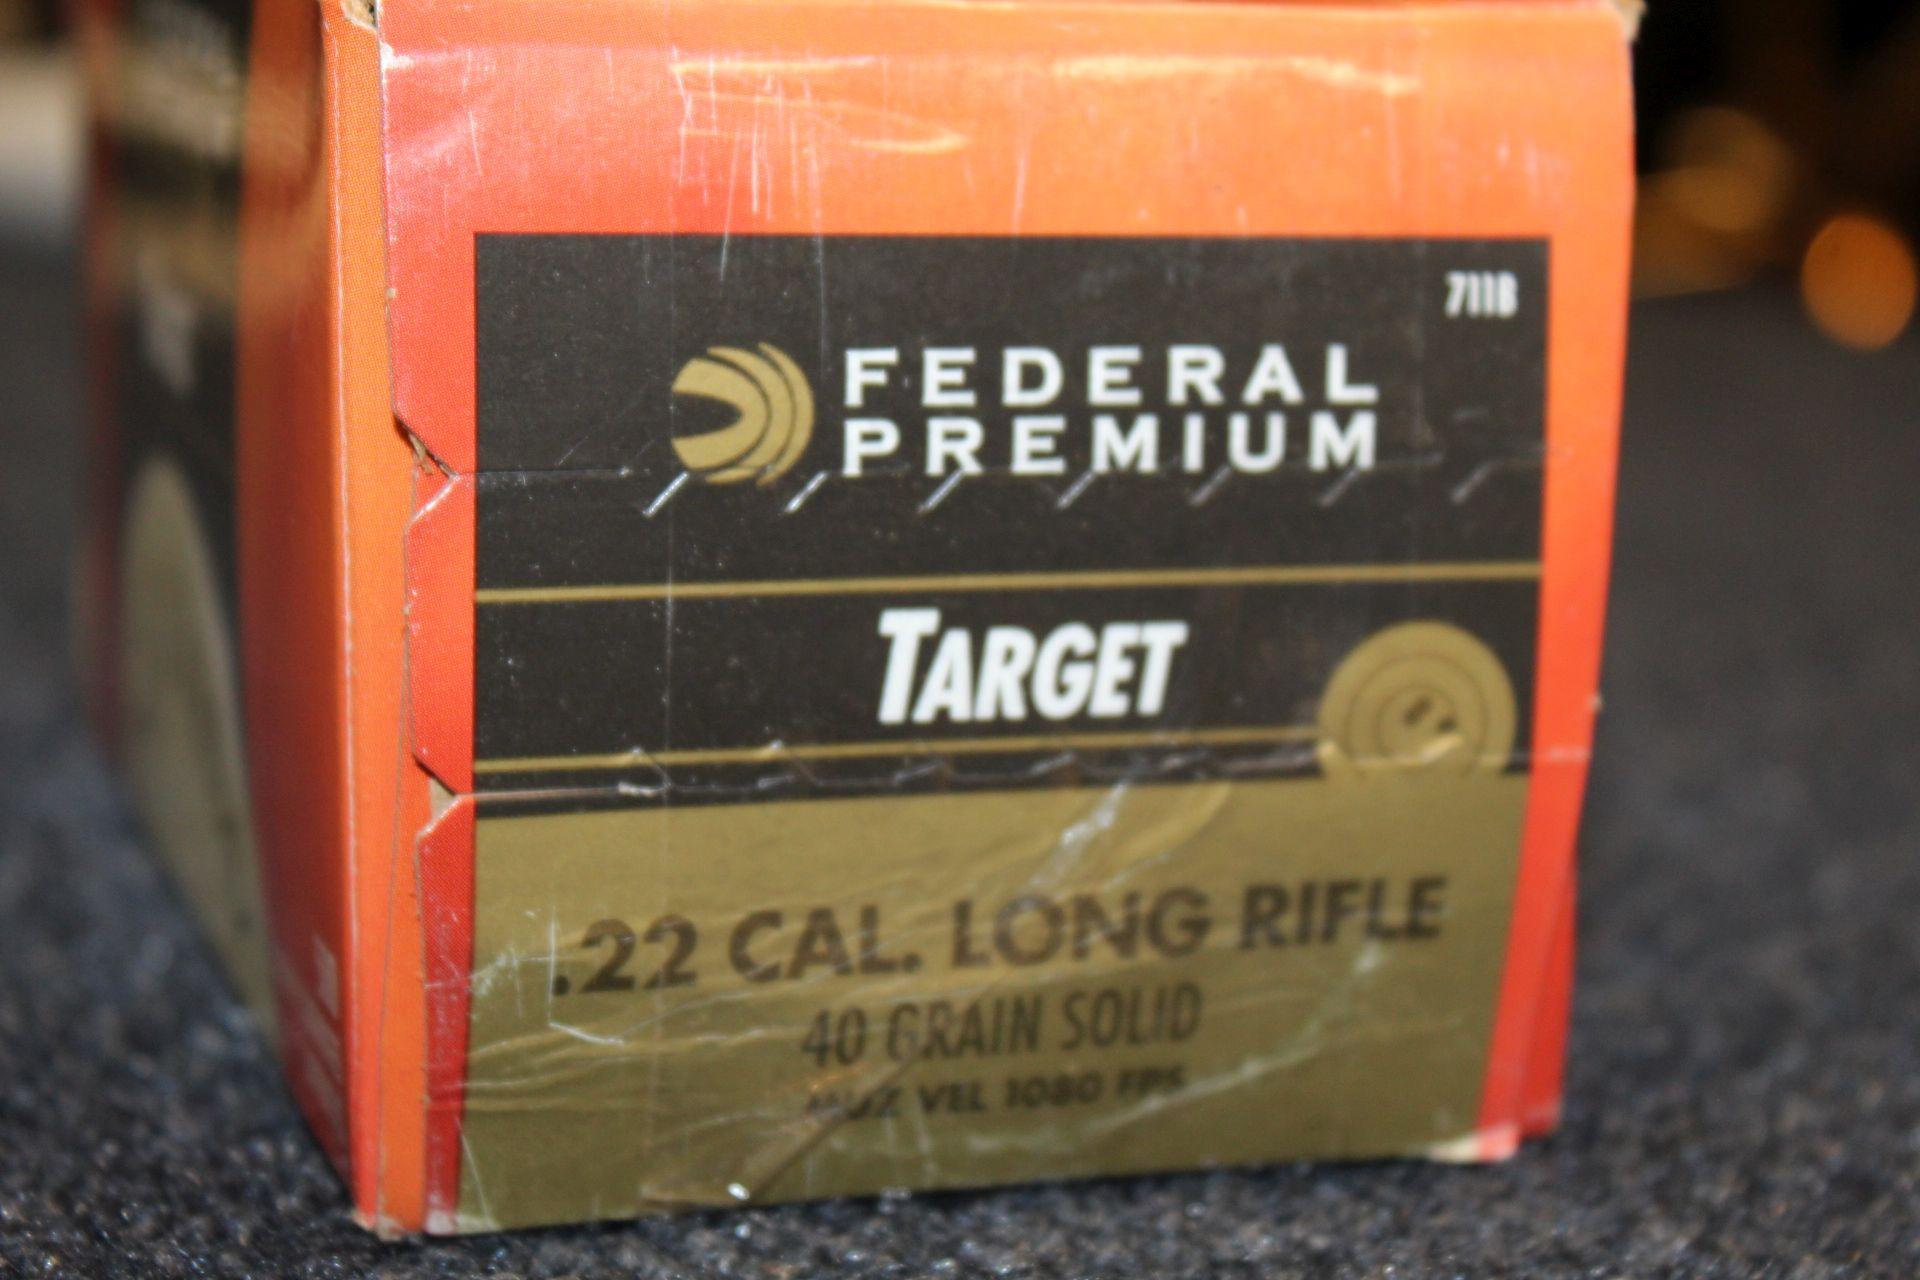 500 Rounds of Federal .22 LR Ammo.